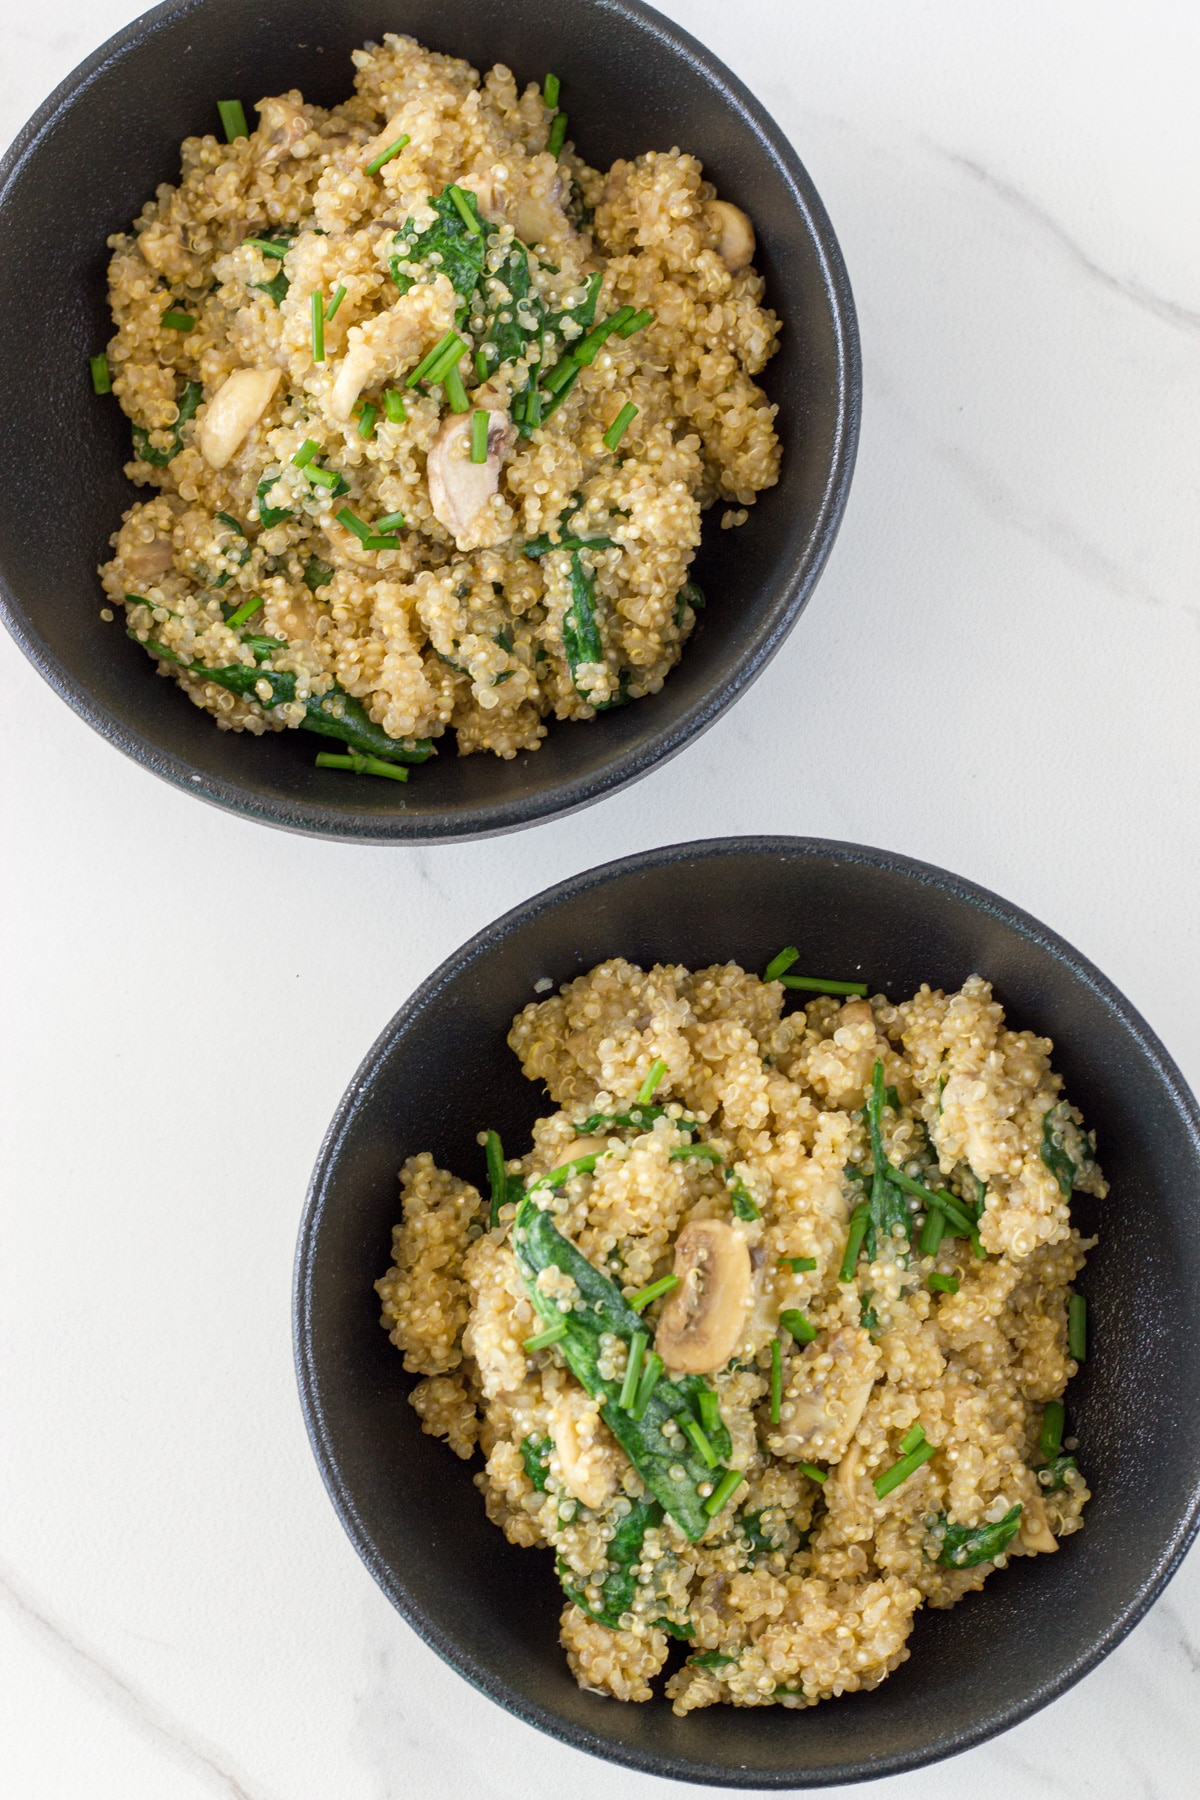 photo of Mushroom and Spinach Quinoa Risotto when it is ready to eat